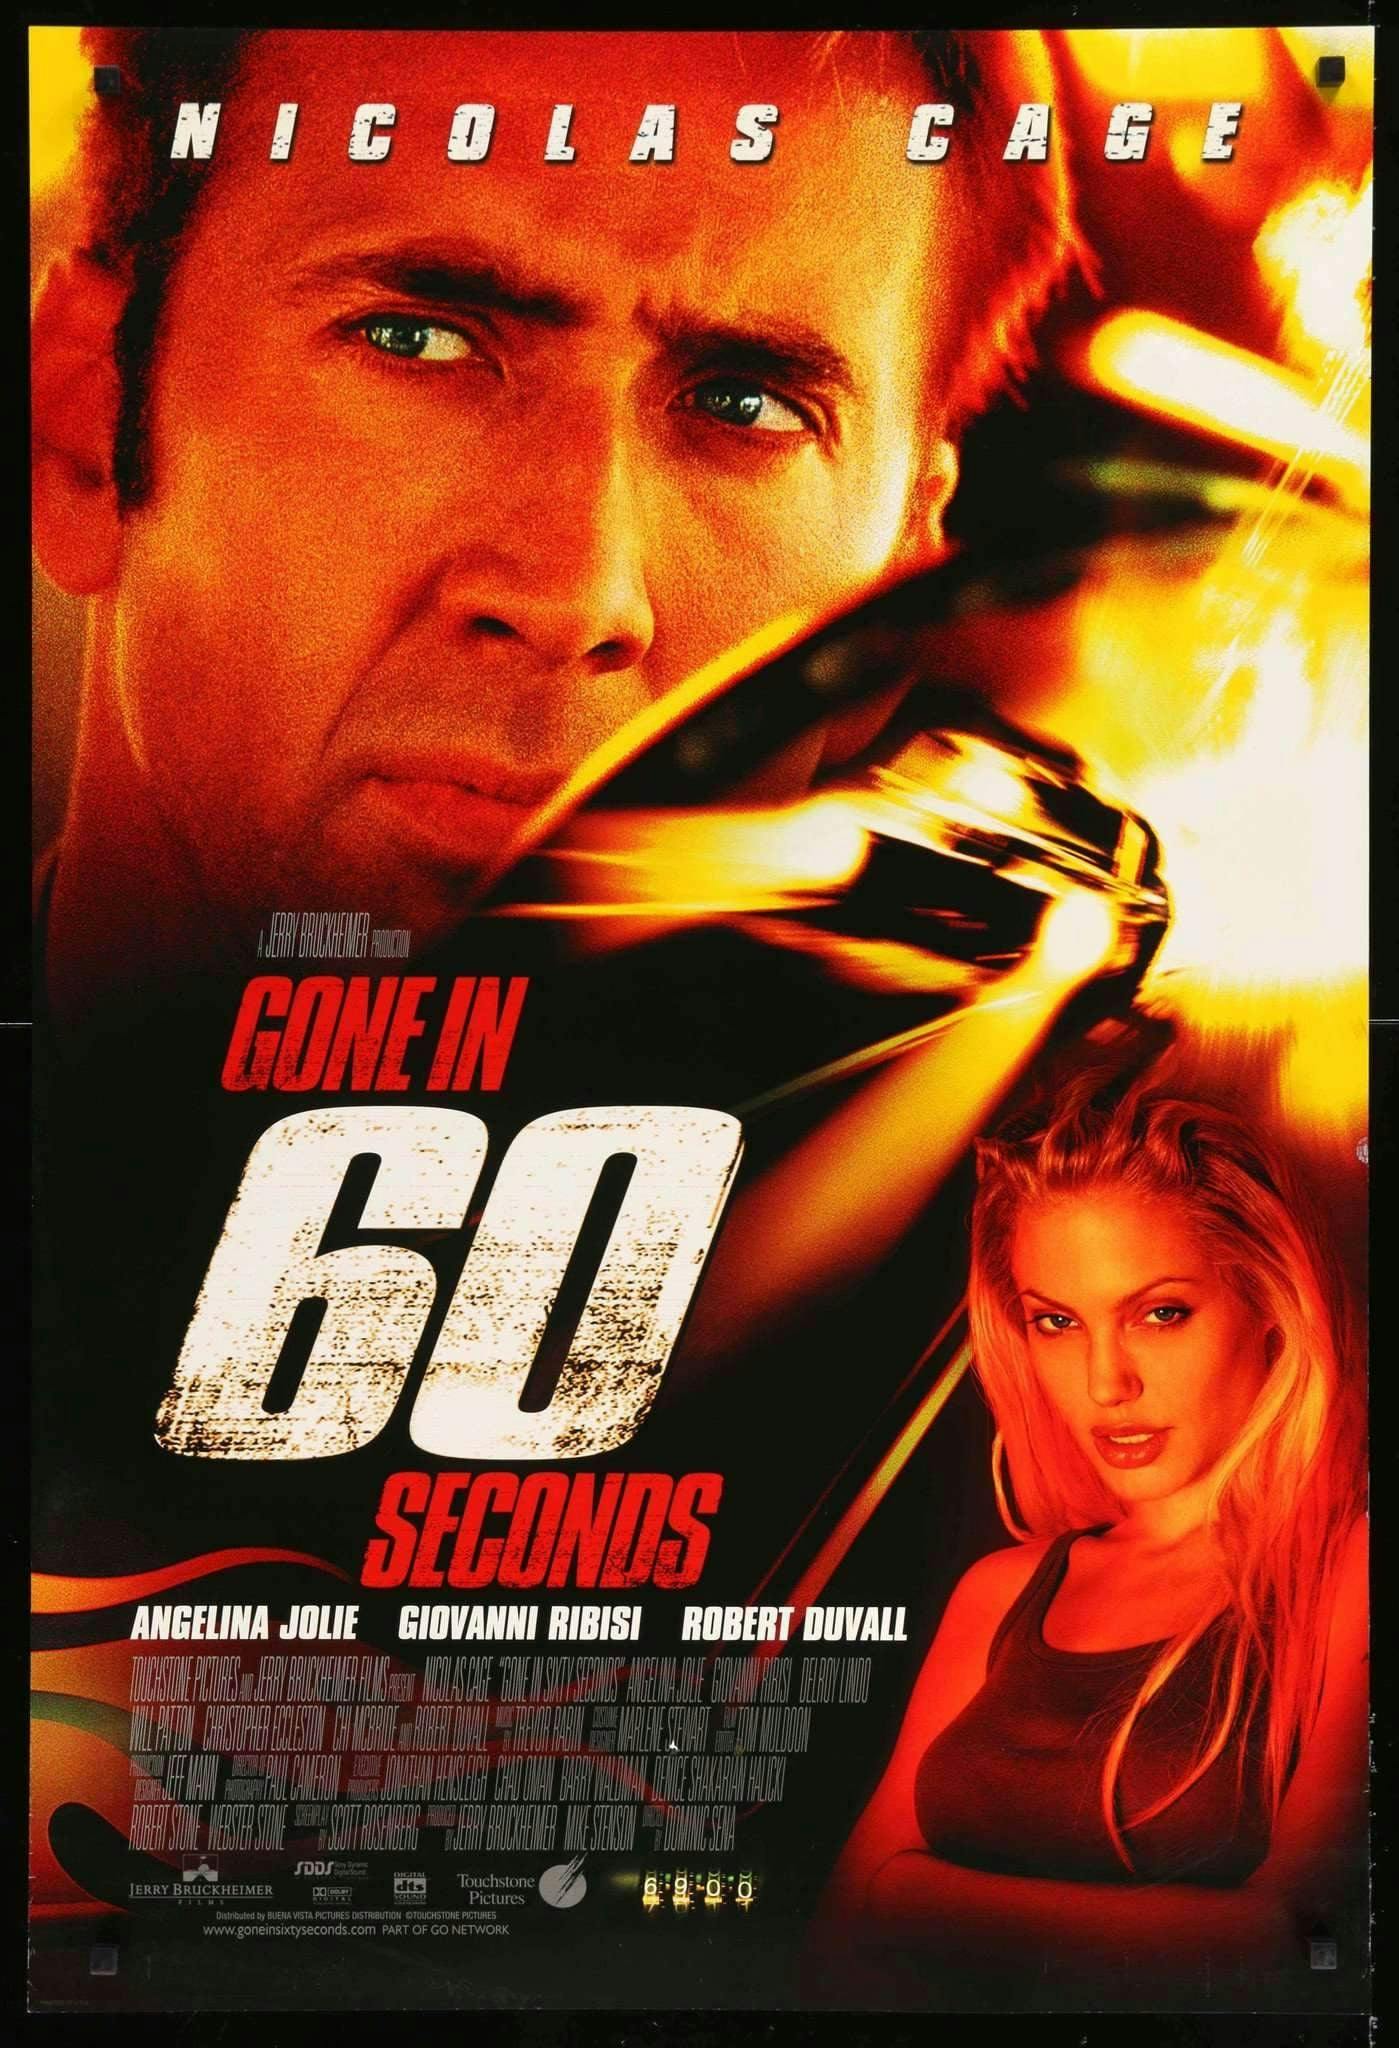 Gone in 60 seconds movie poster